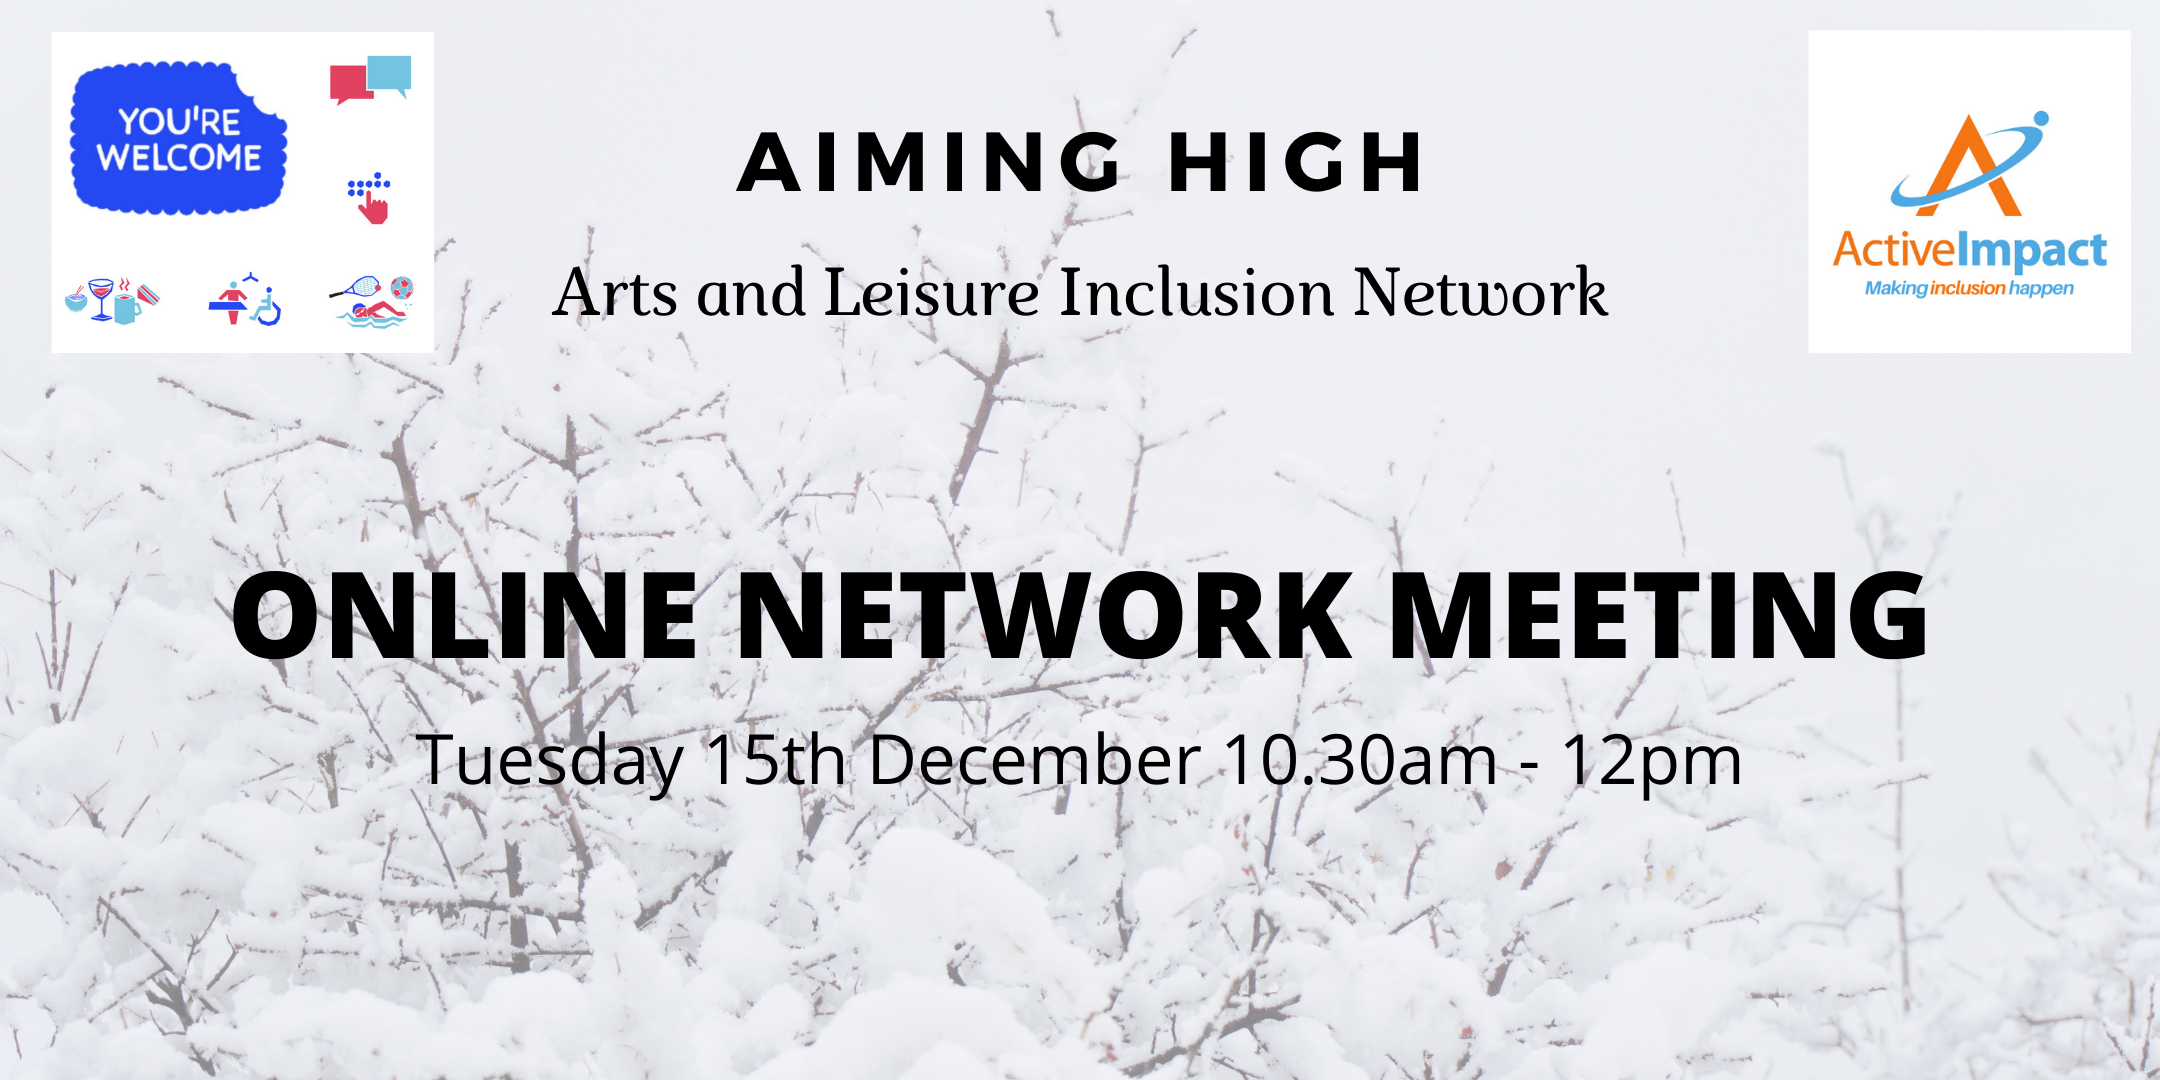 aiming high network